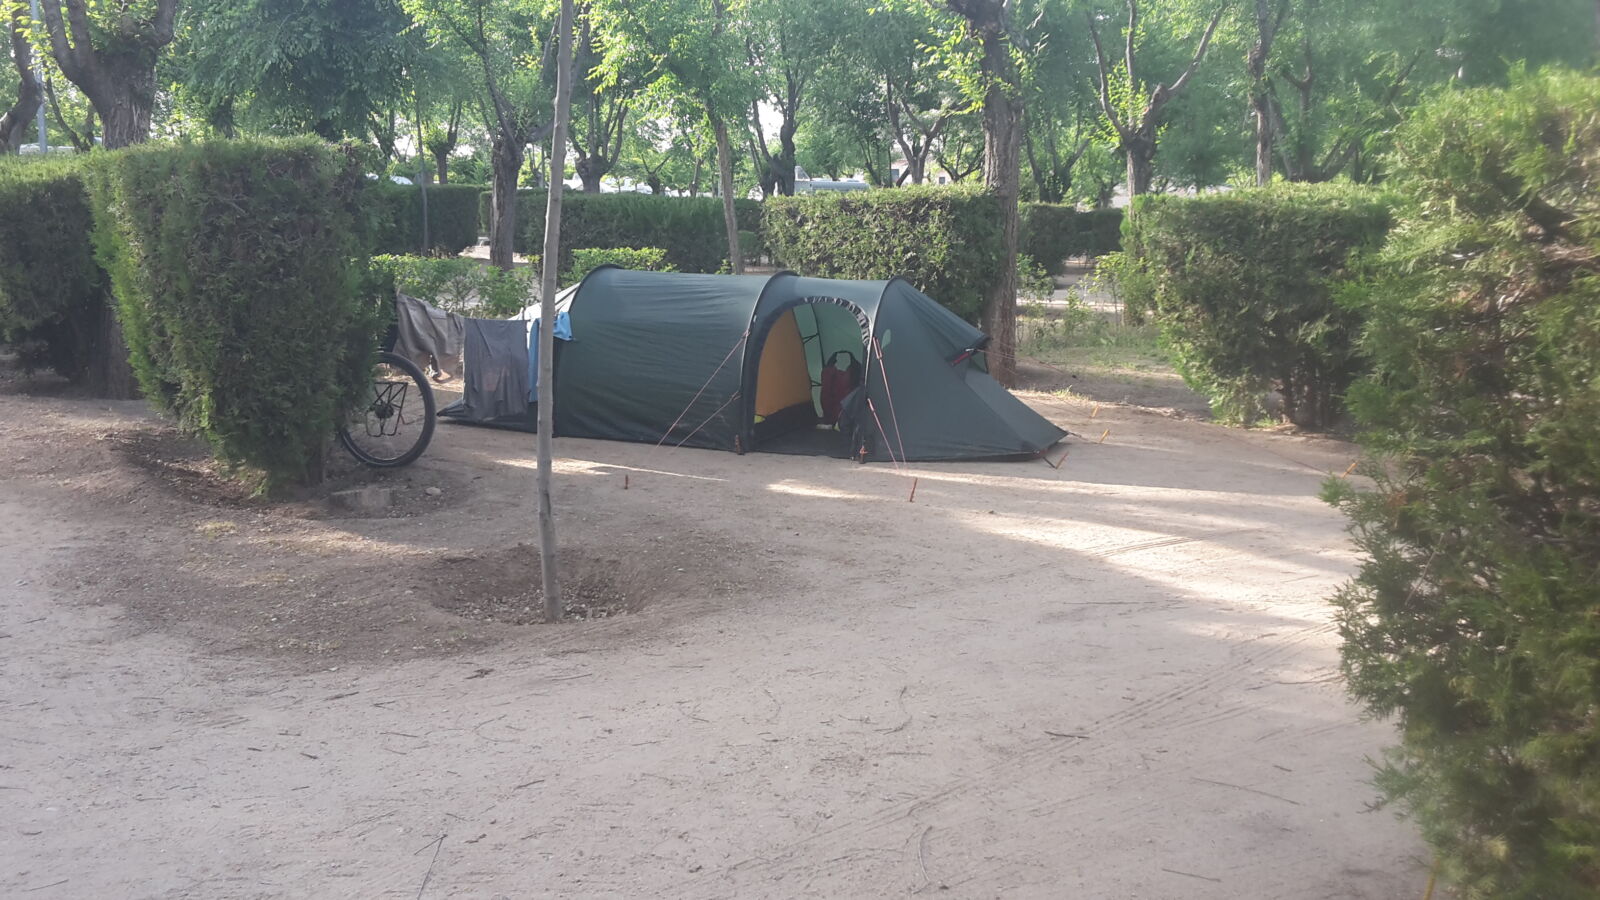 A tent in a park